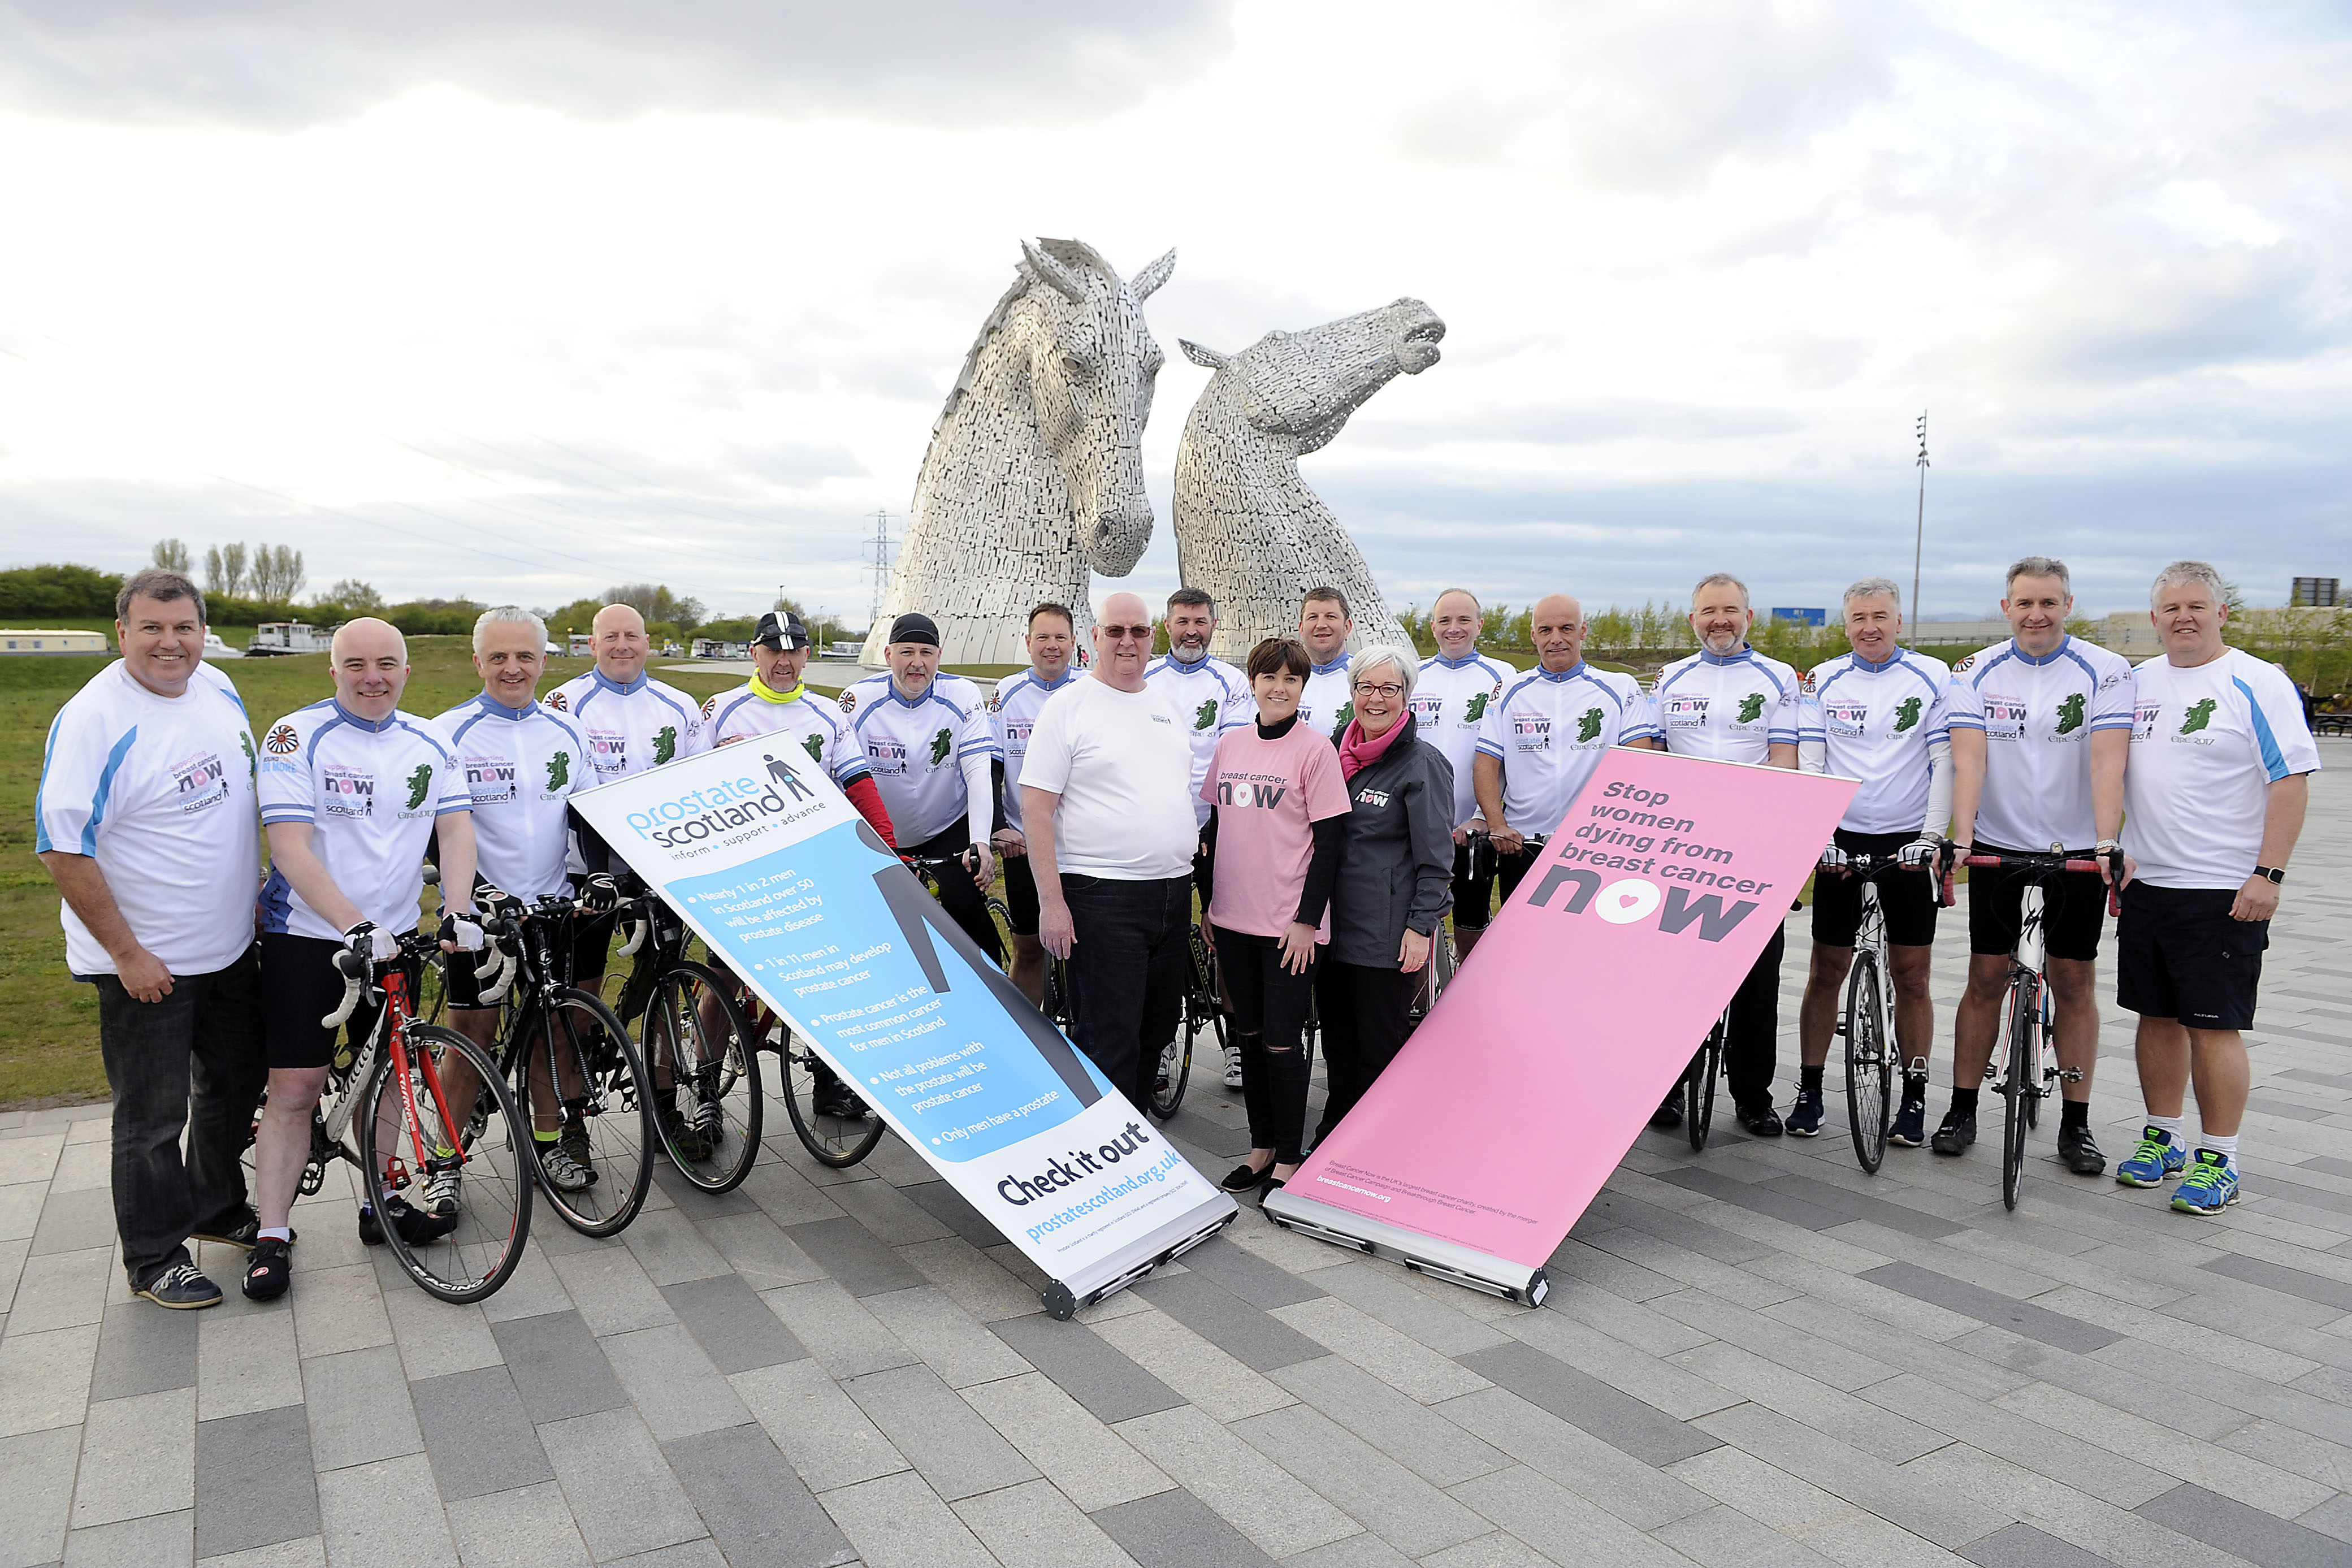 Falkirk Round Table and Larbert & Falkirk 41 Club Cycle Challenge